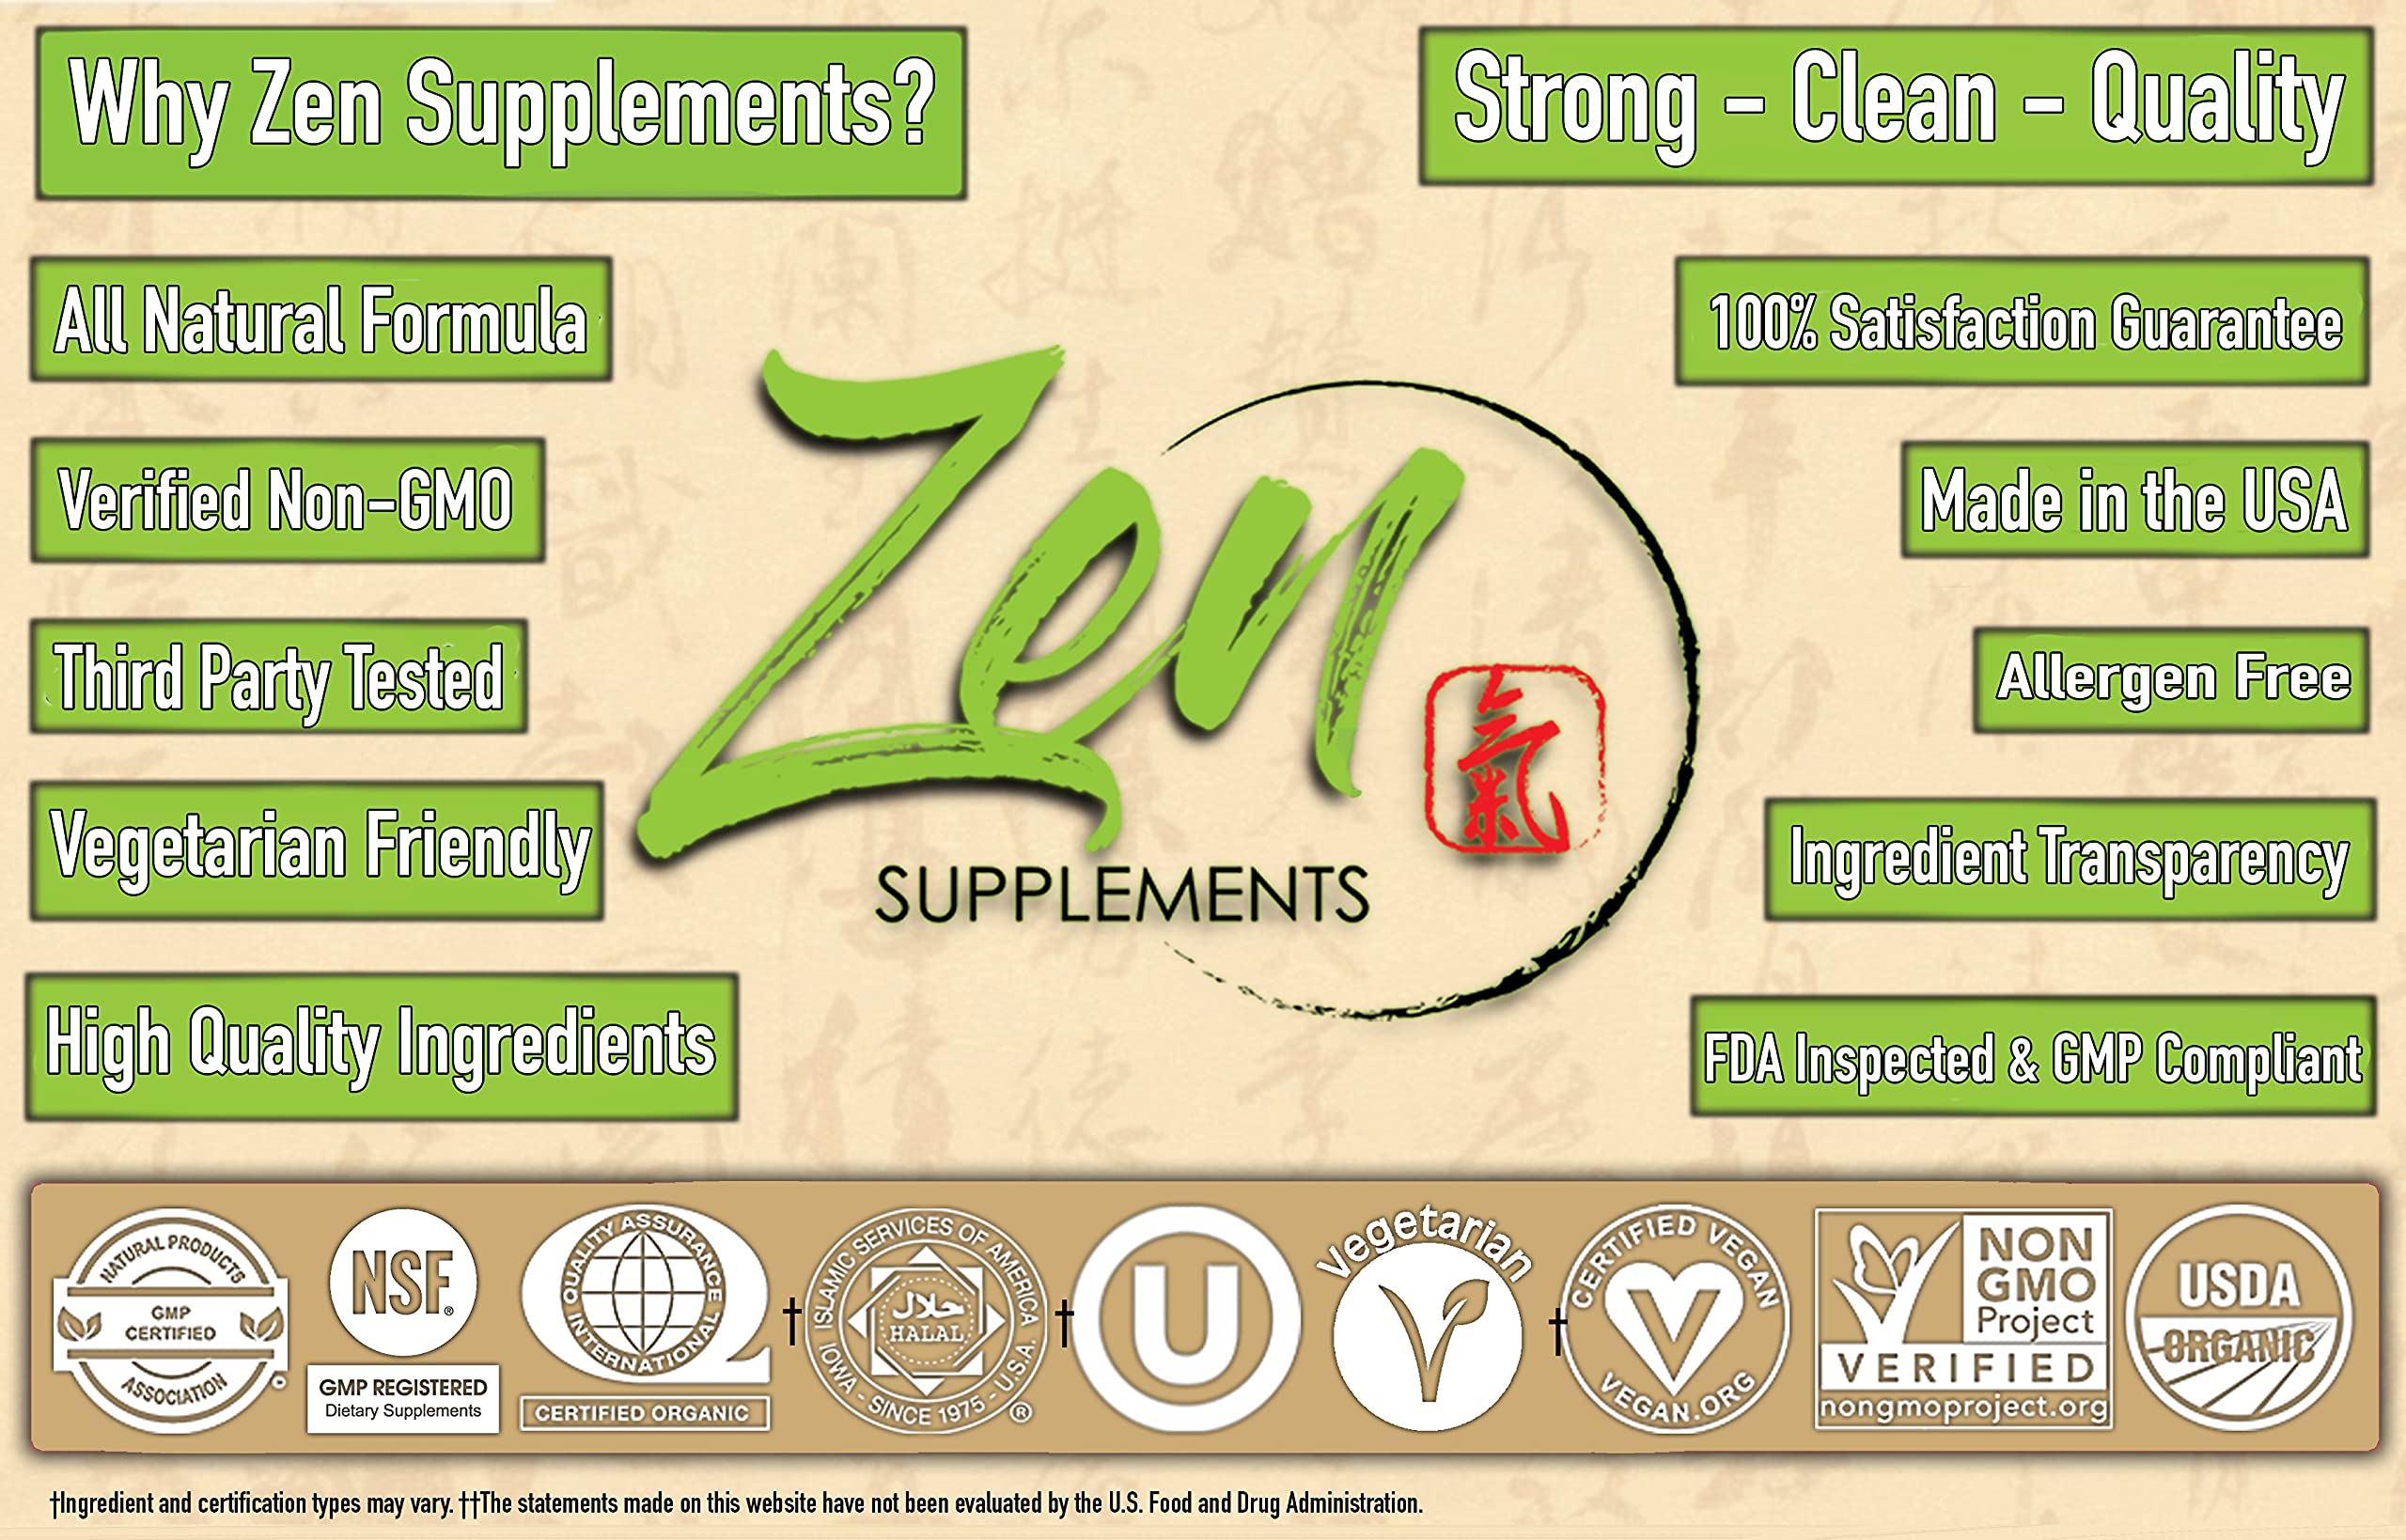 Zen Supplements - Children's Chewable Multi-Vitamin with Acidophilus Cherry Flavored 120-Tabs - The Children's Multivitamin You Won't Have to Beg The Kids to take